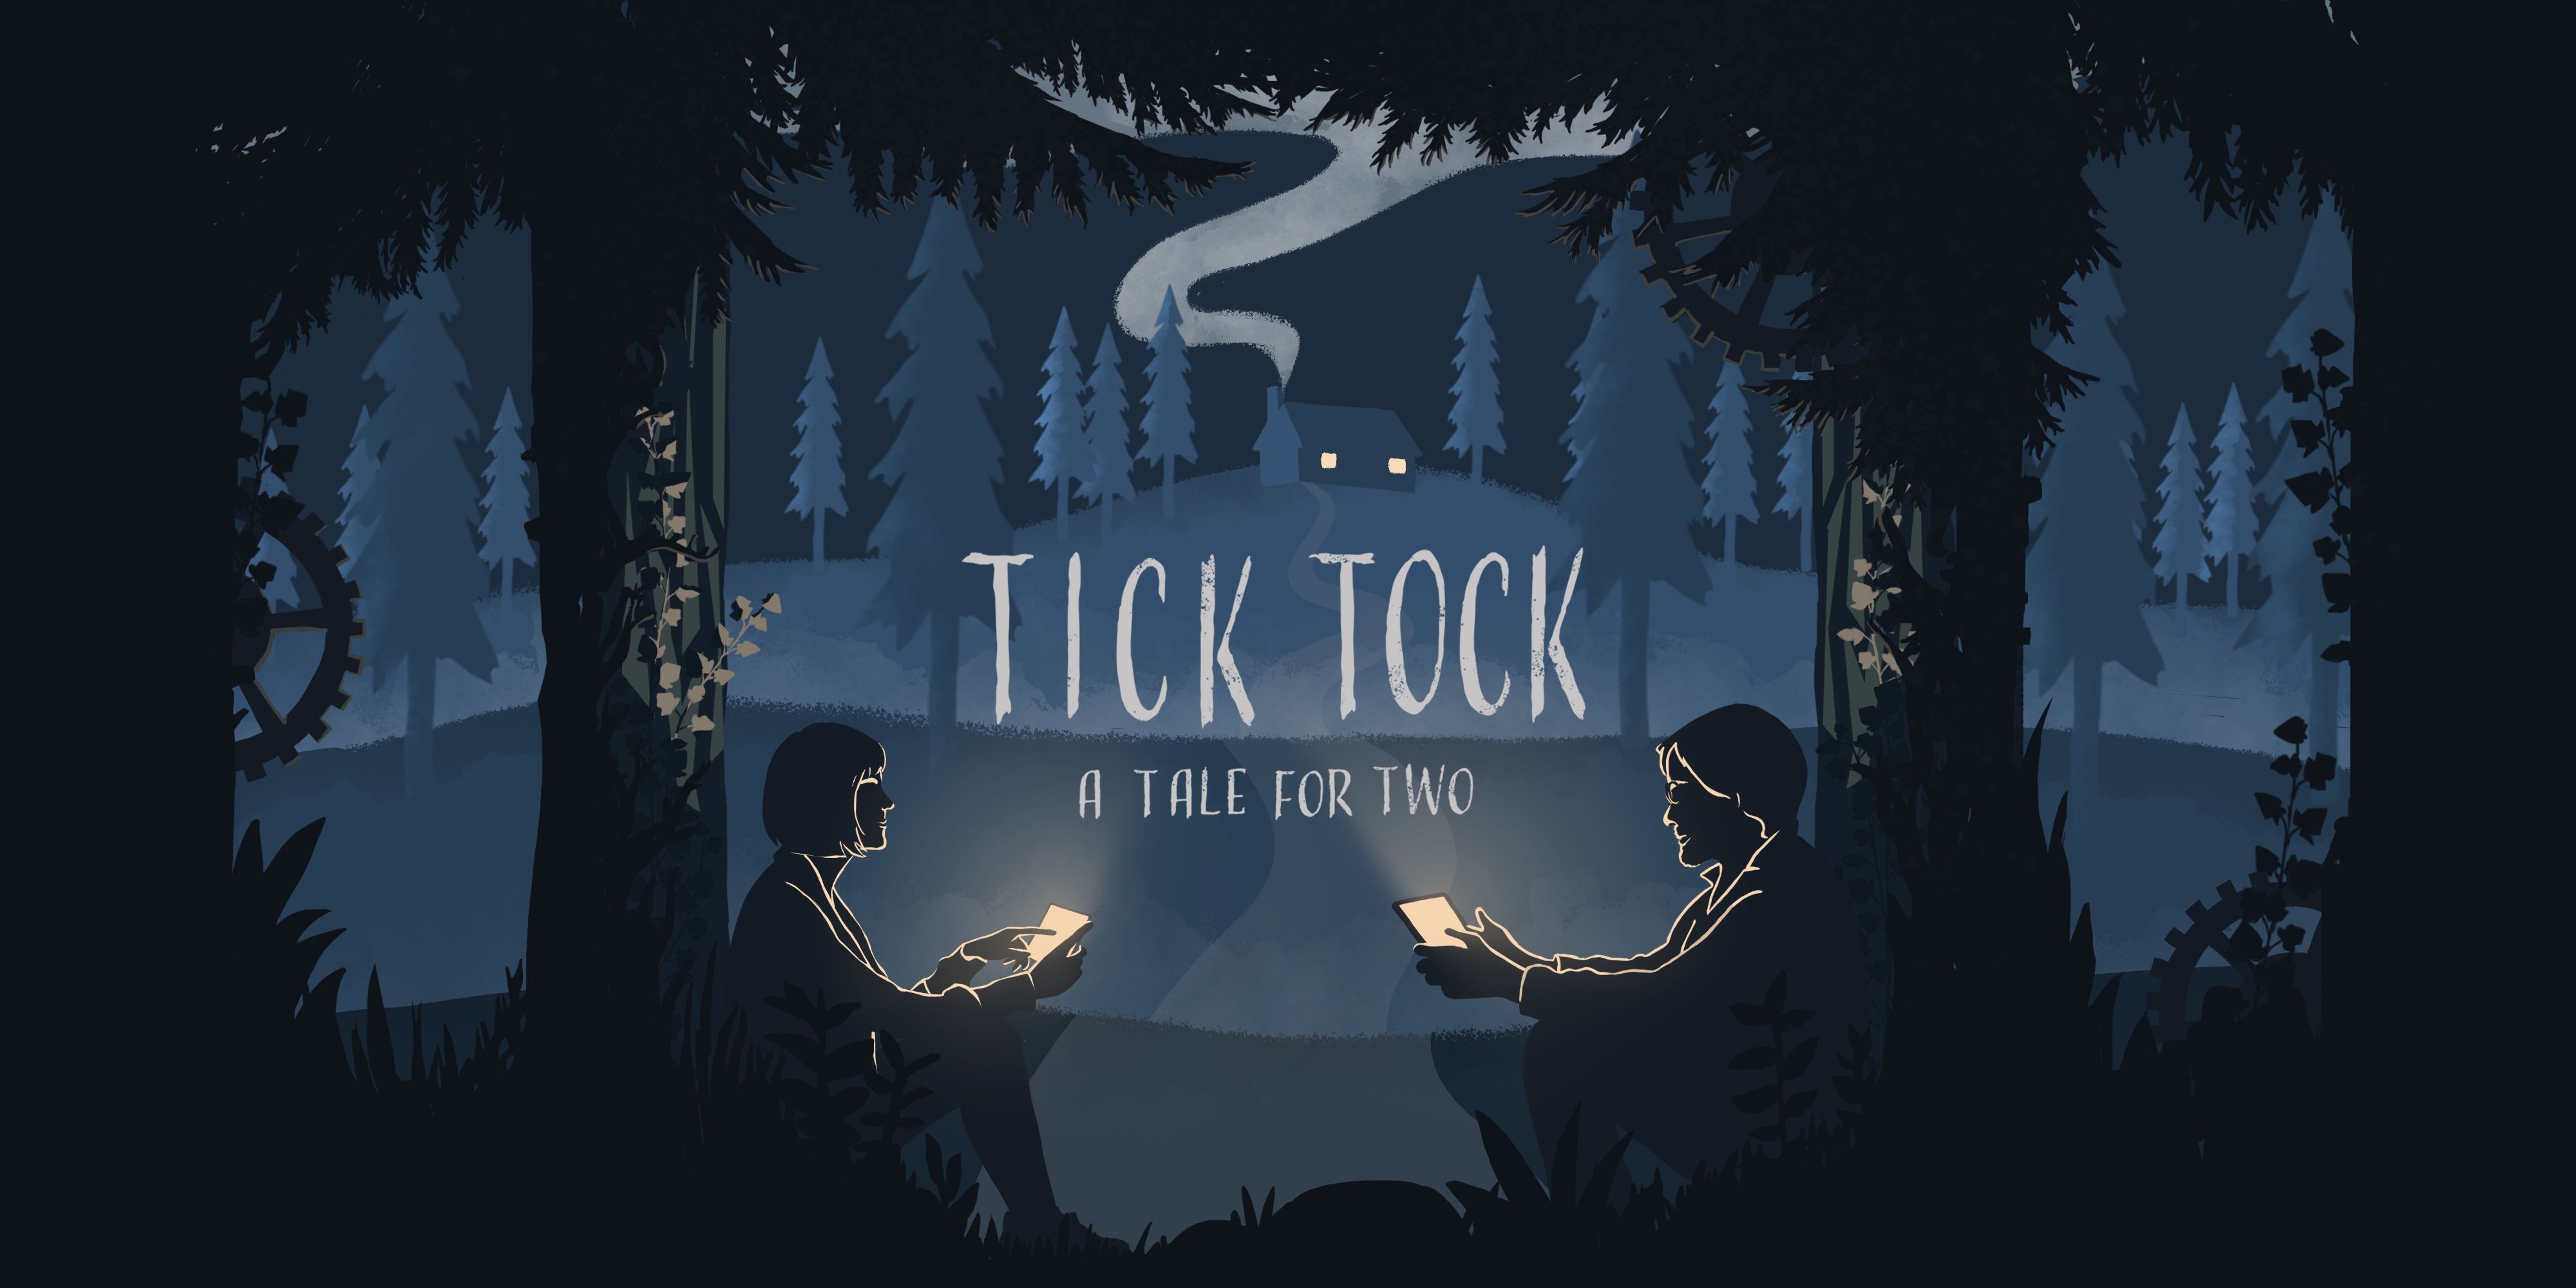 Two characters look at their phones in a dark forest on the cover art for Tick Tock: A Tale for Two